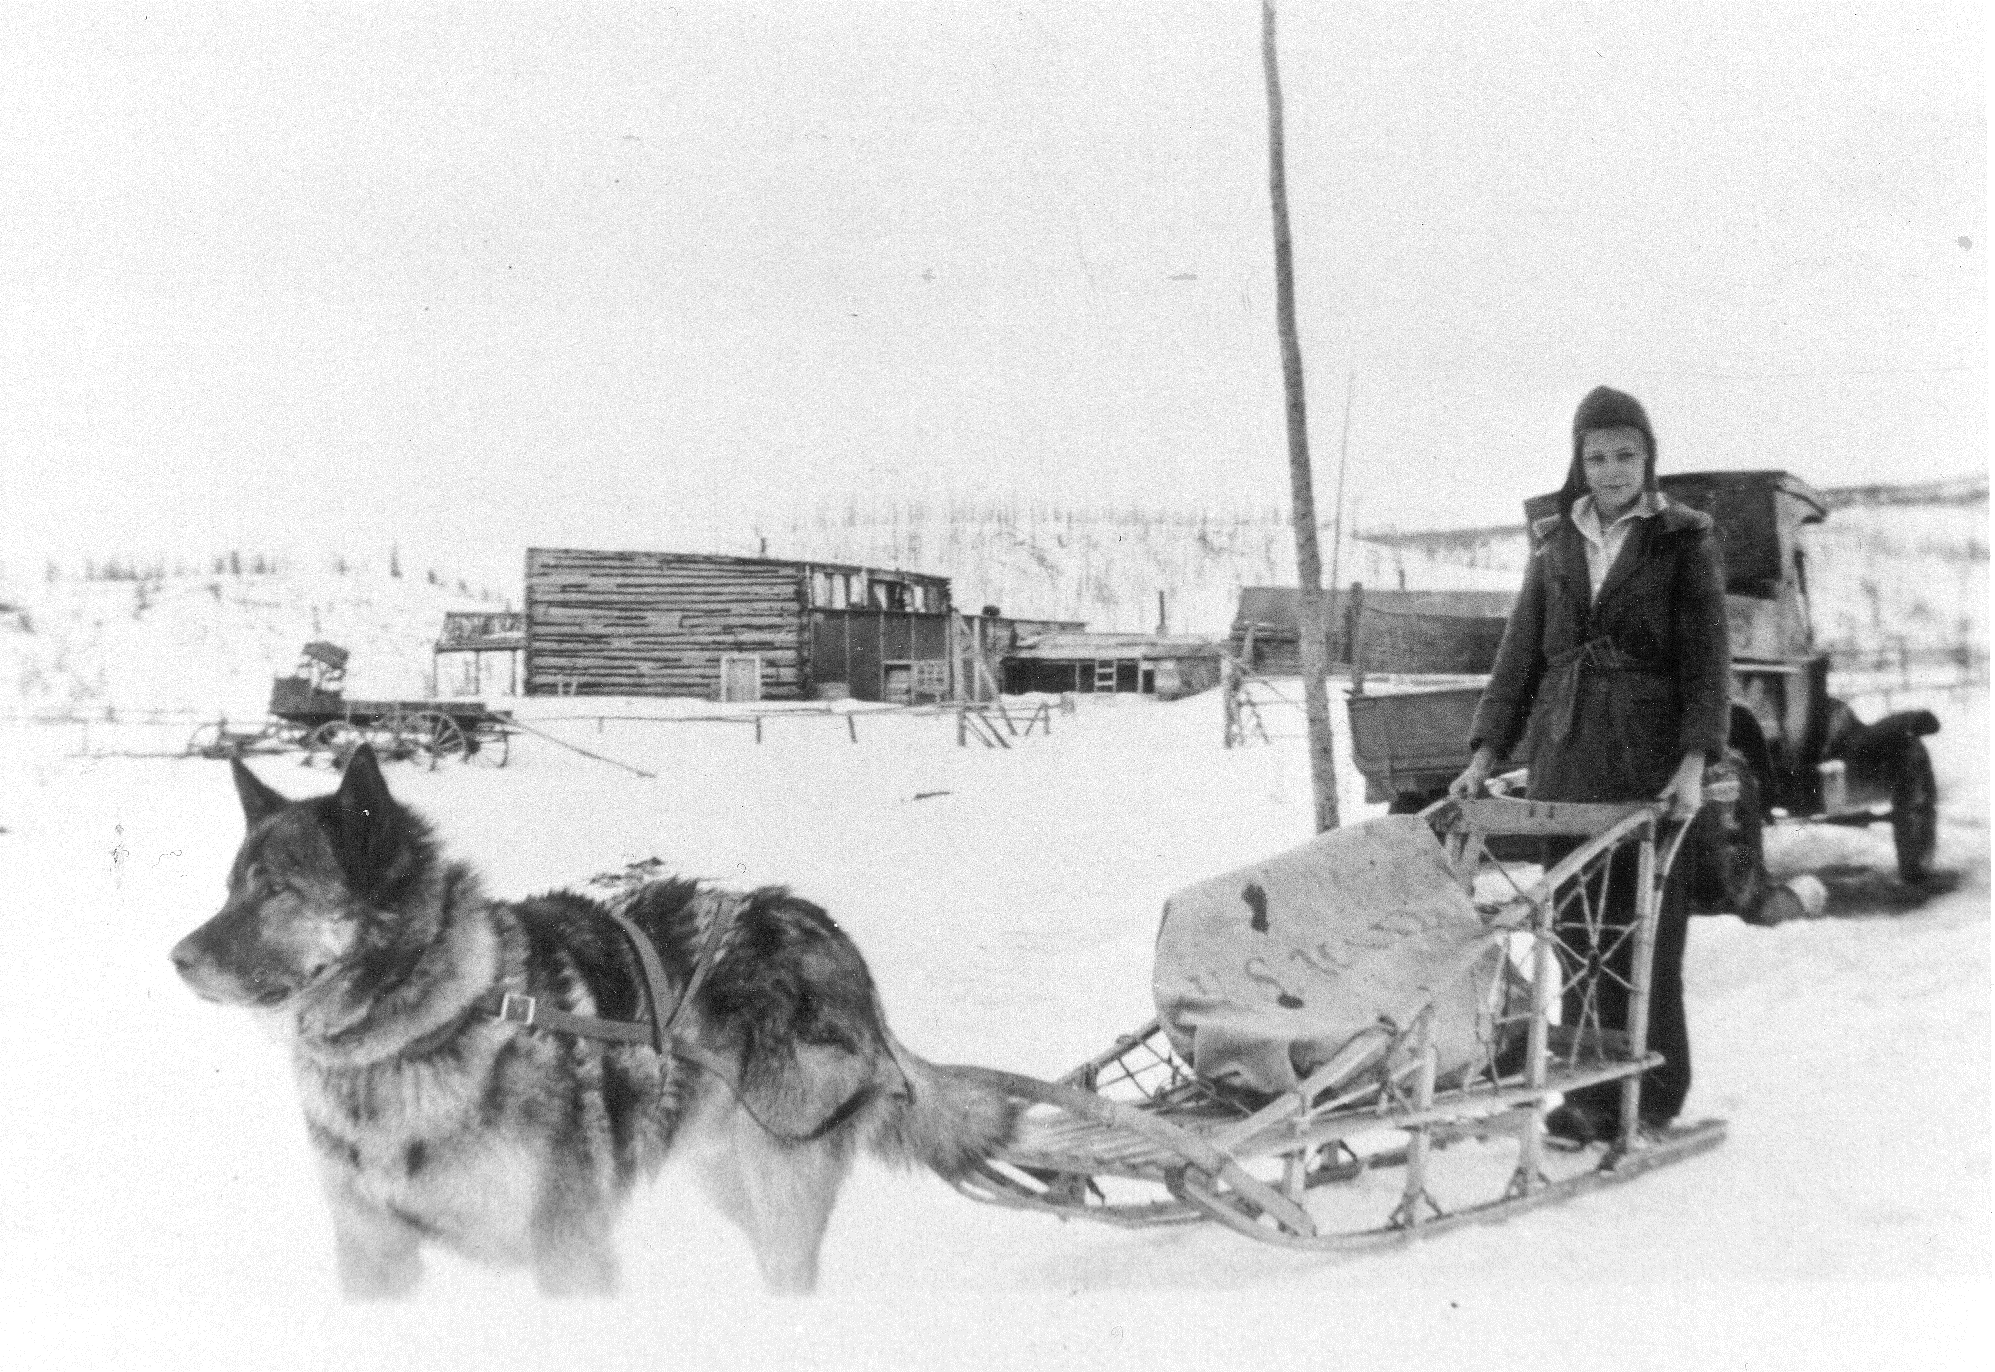 a woman on a sled pulled by a dog